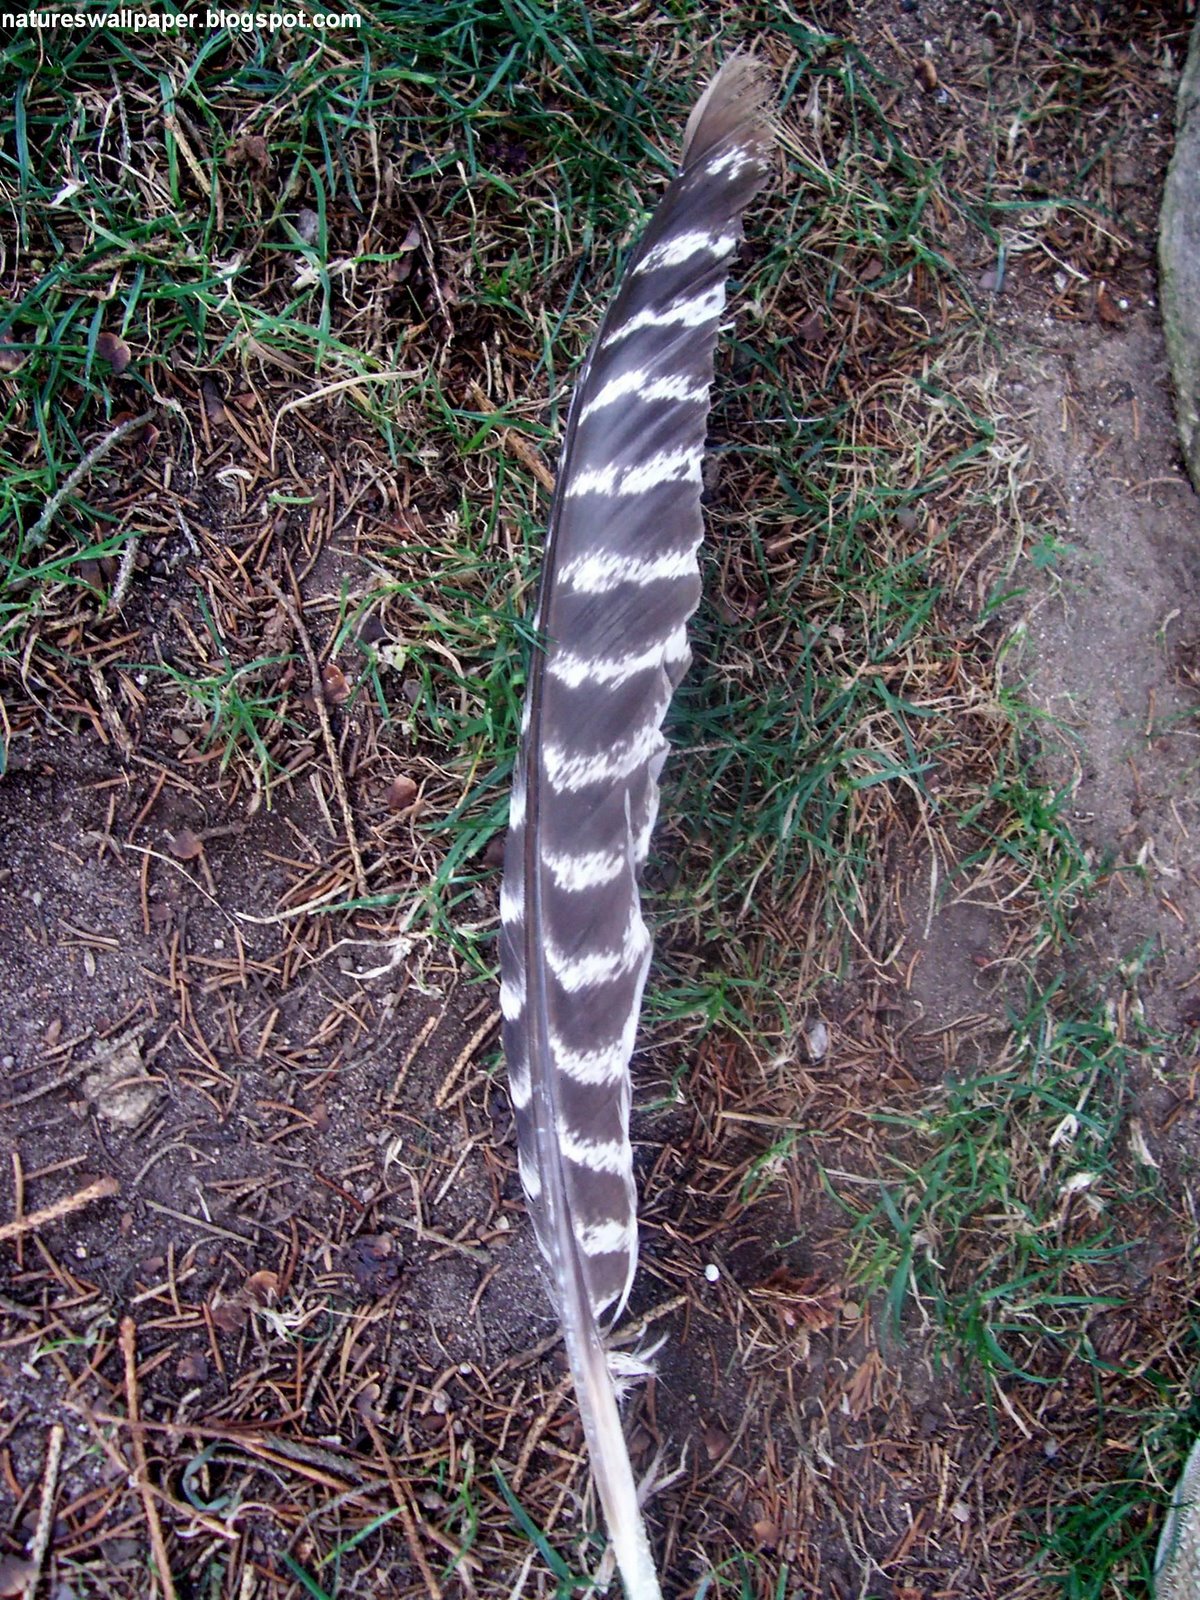 [Feather+On+The+Ground.jpg]